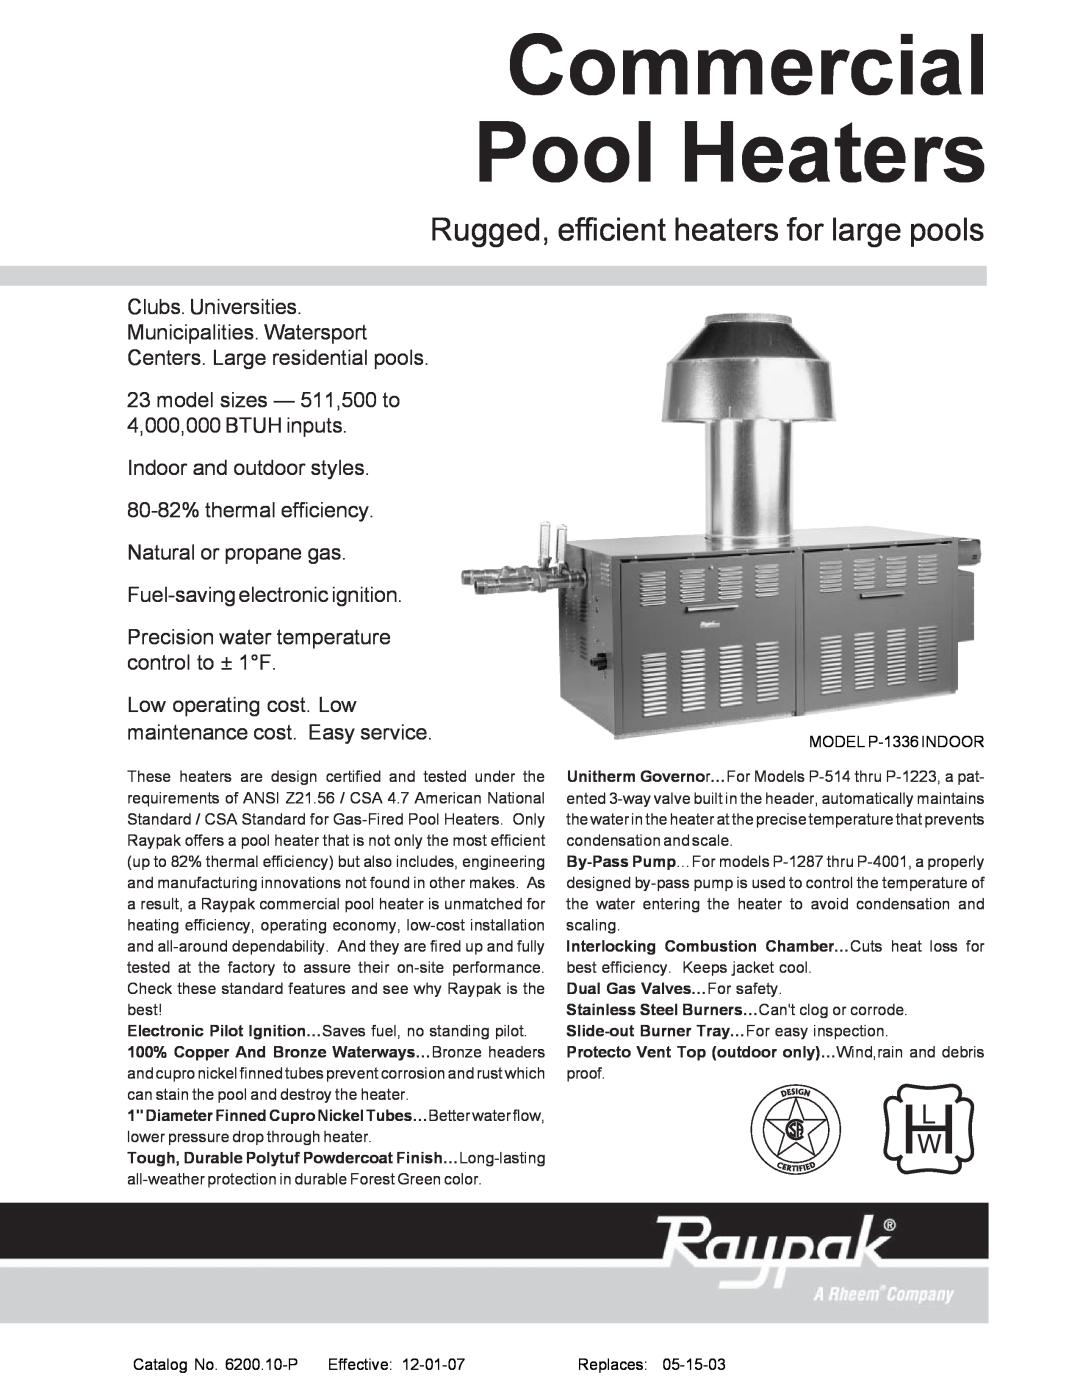 Raypak P-1223 manual Commercial Pool Heaters, Rugged, efficient heaters for large pools, Centers. Large residential pools 